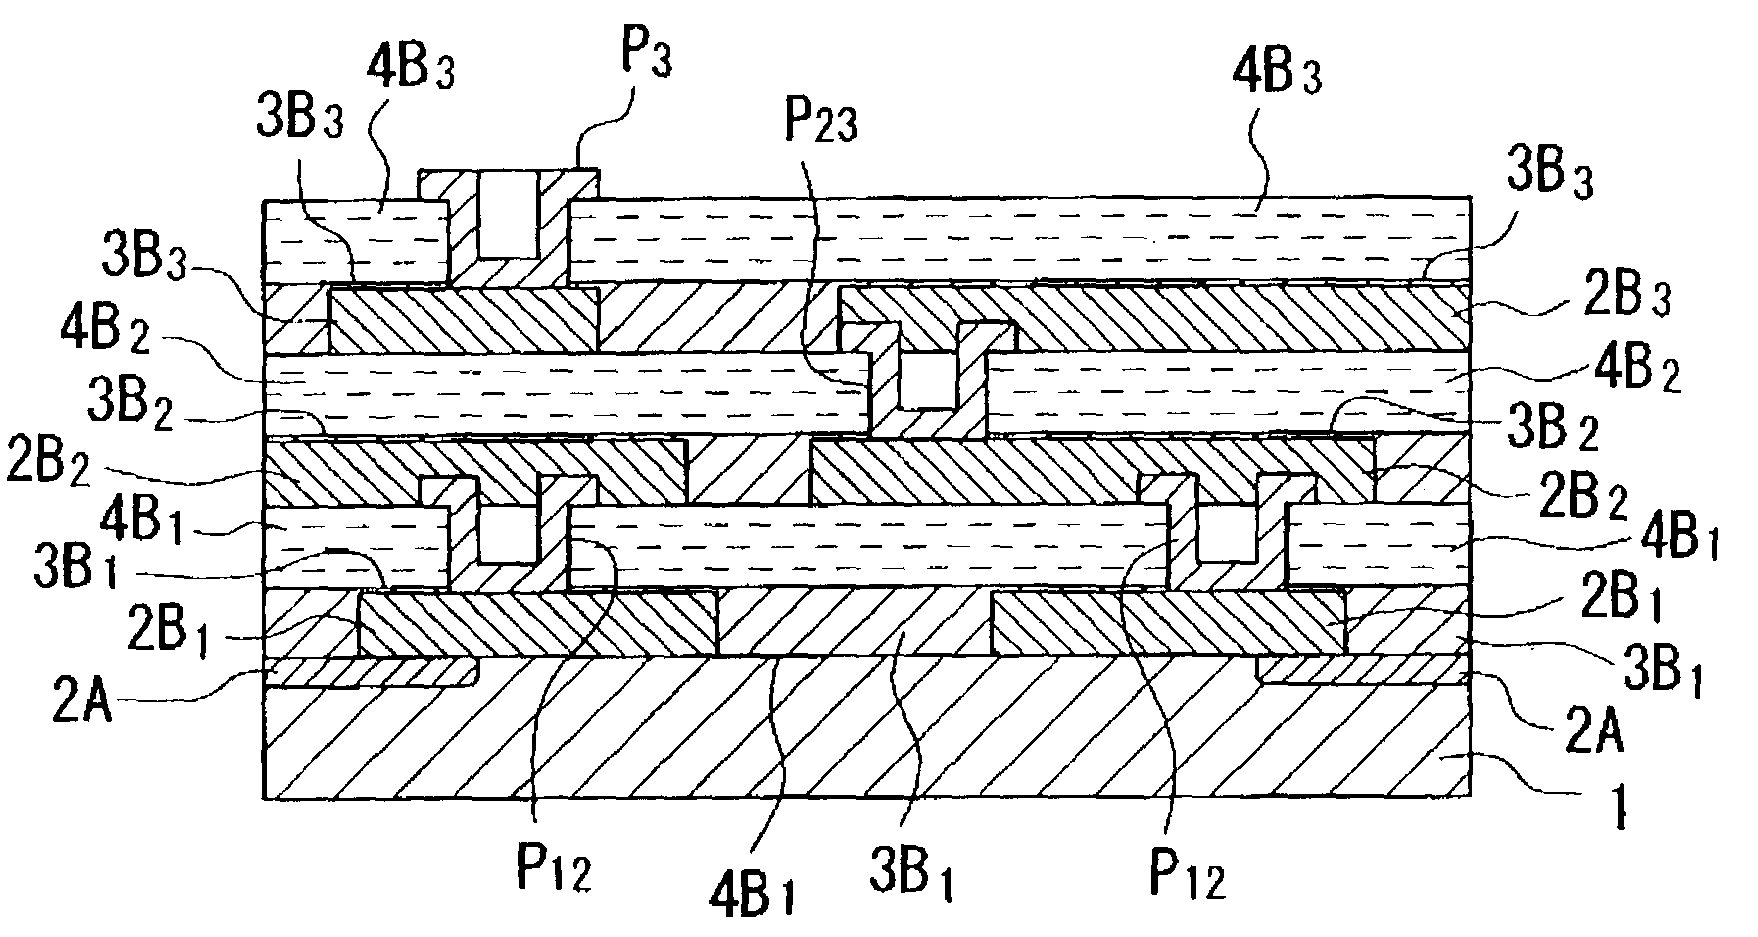 Method of manufacturing a device